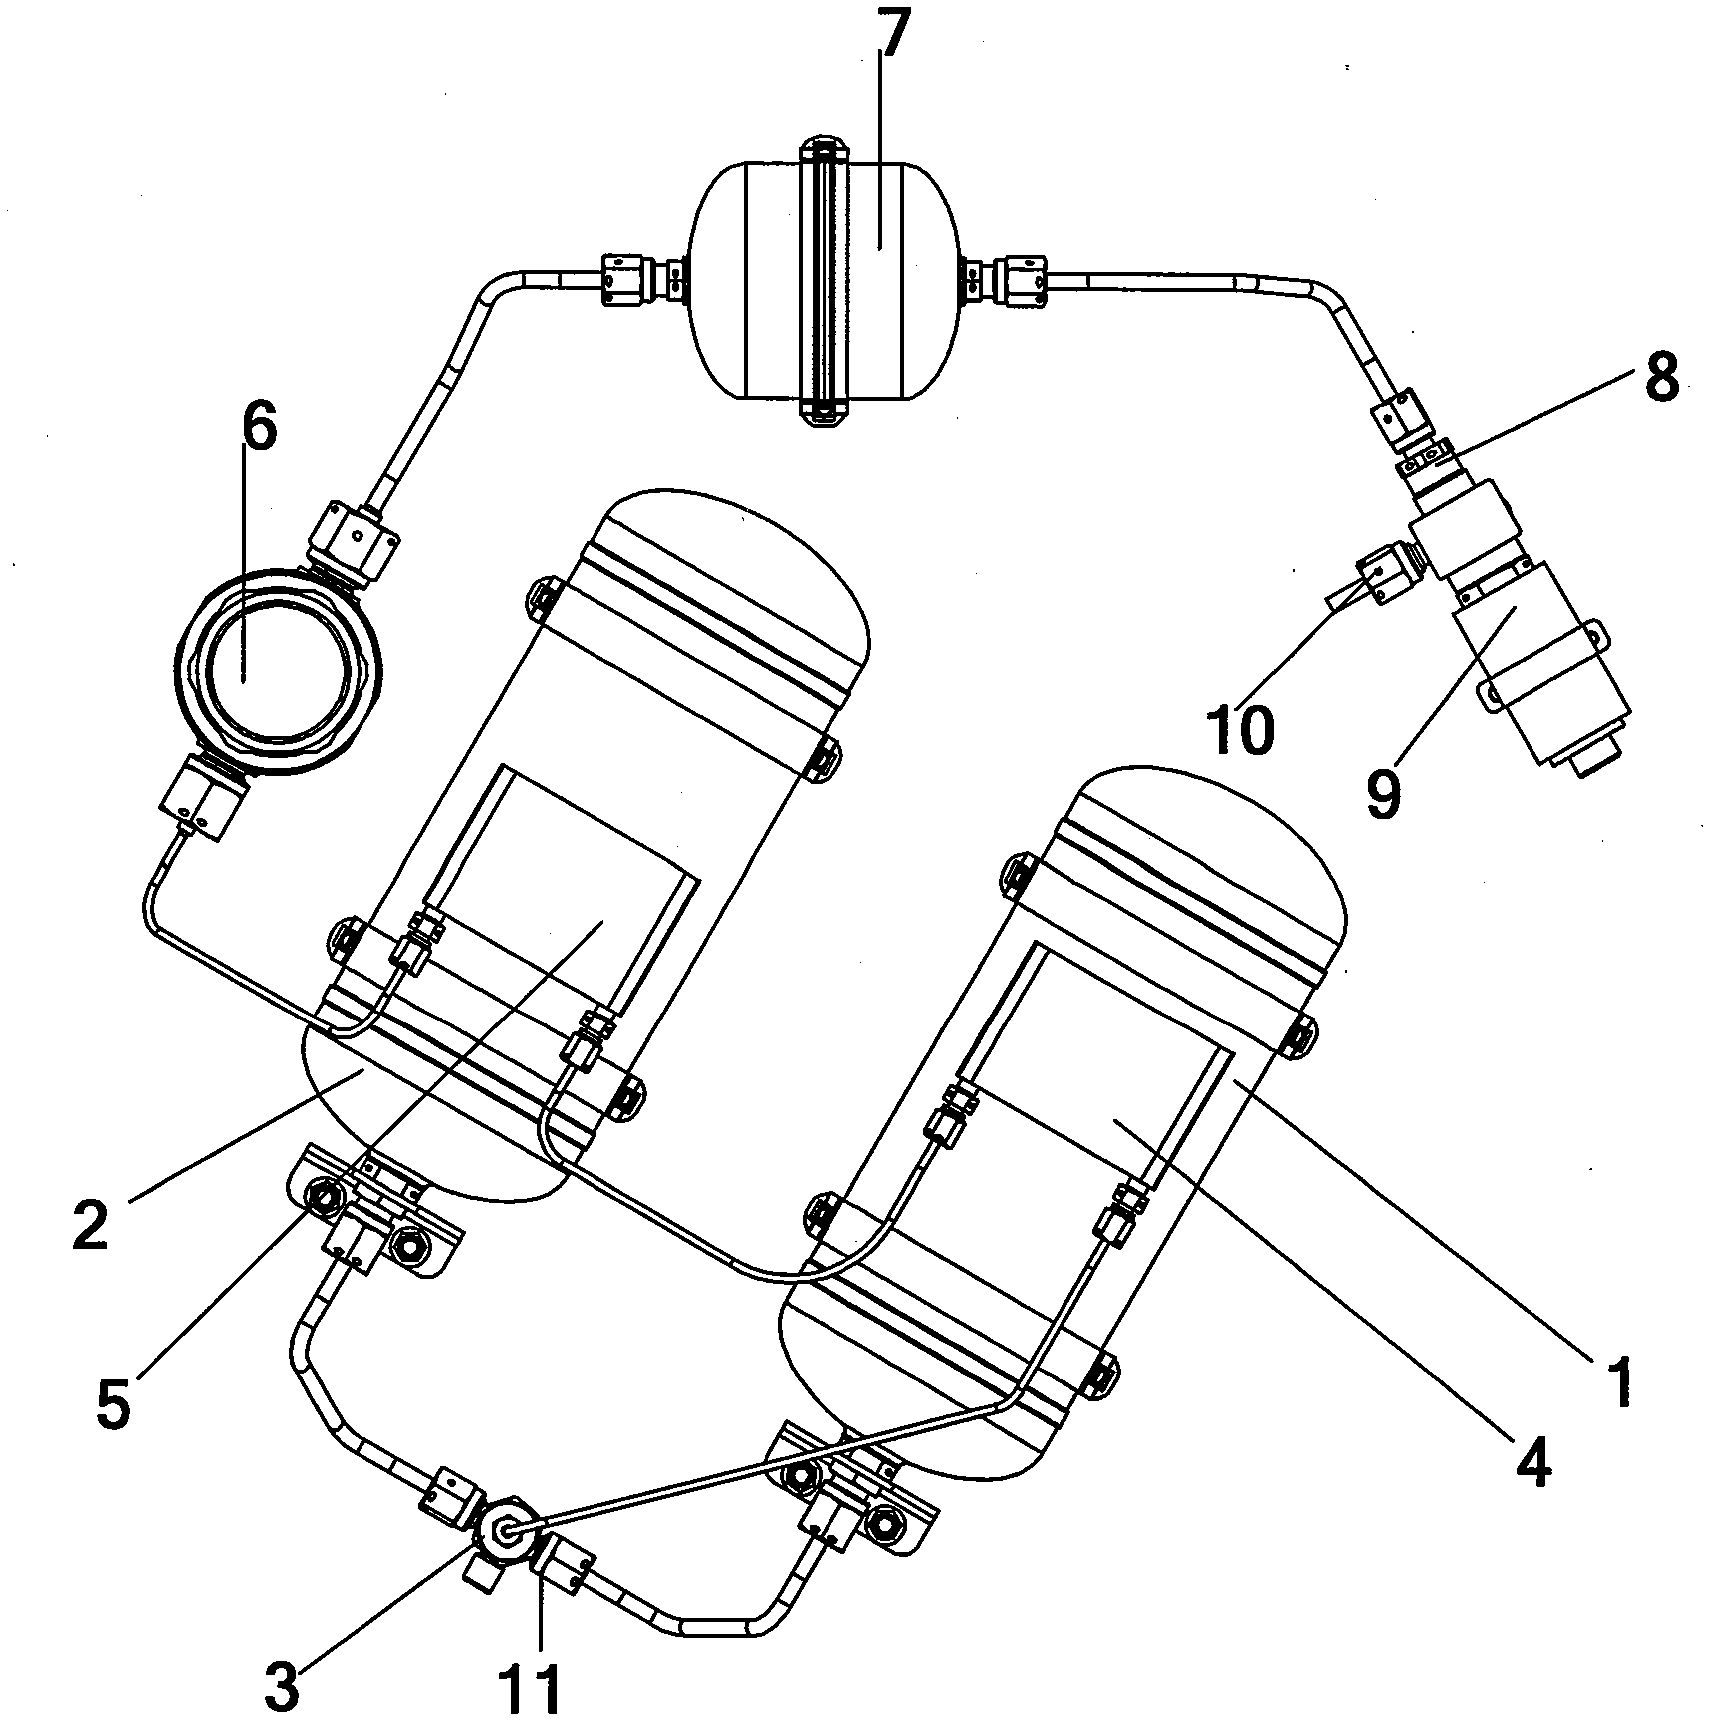 Heating gasification device for liquefied gas micro-propulsion system